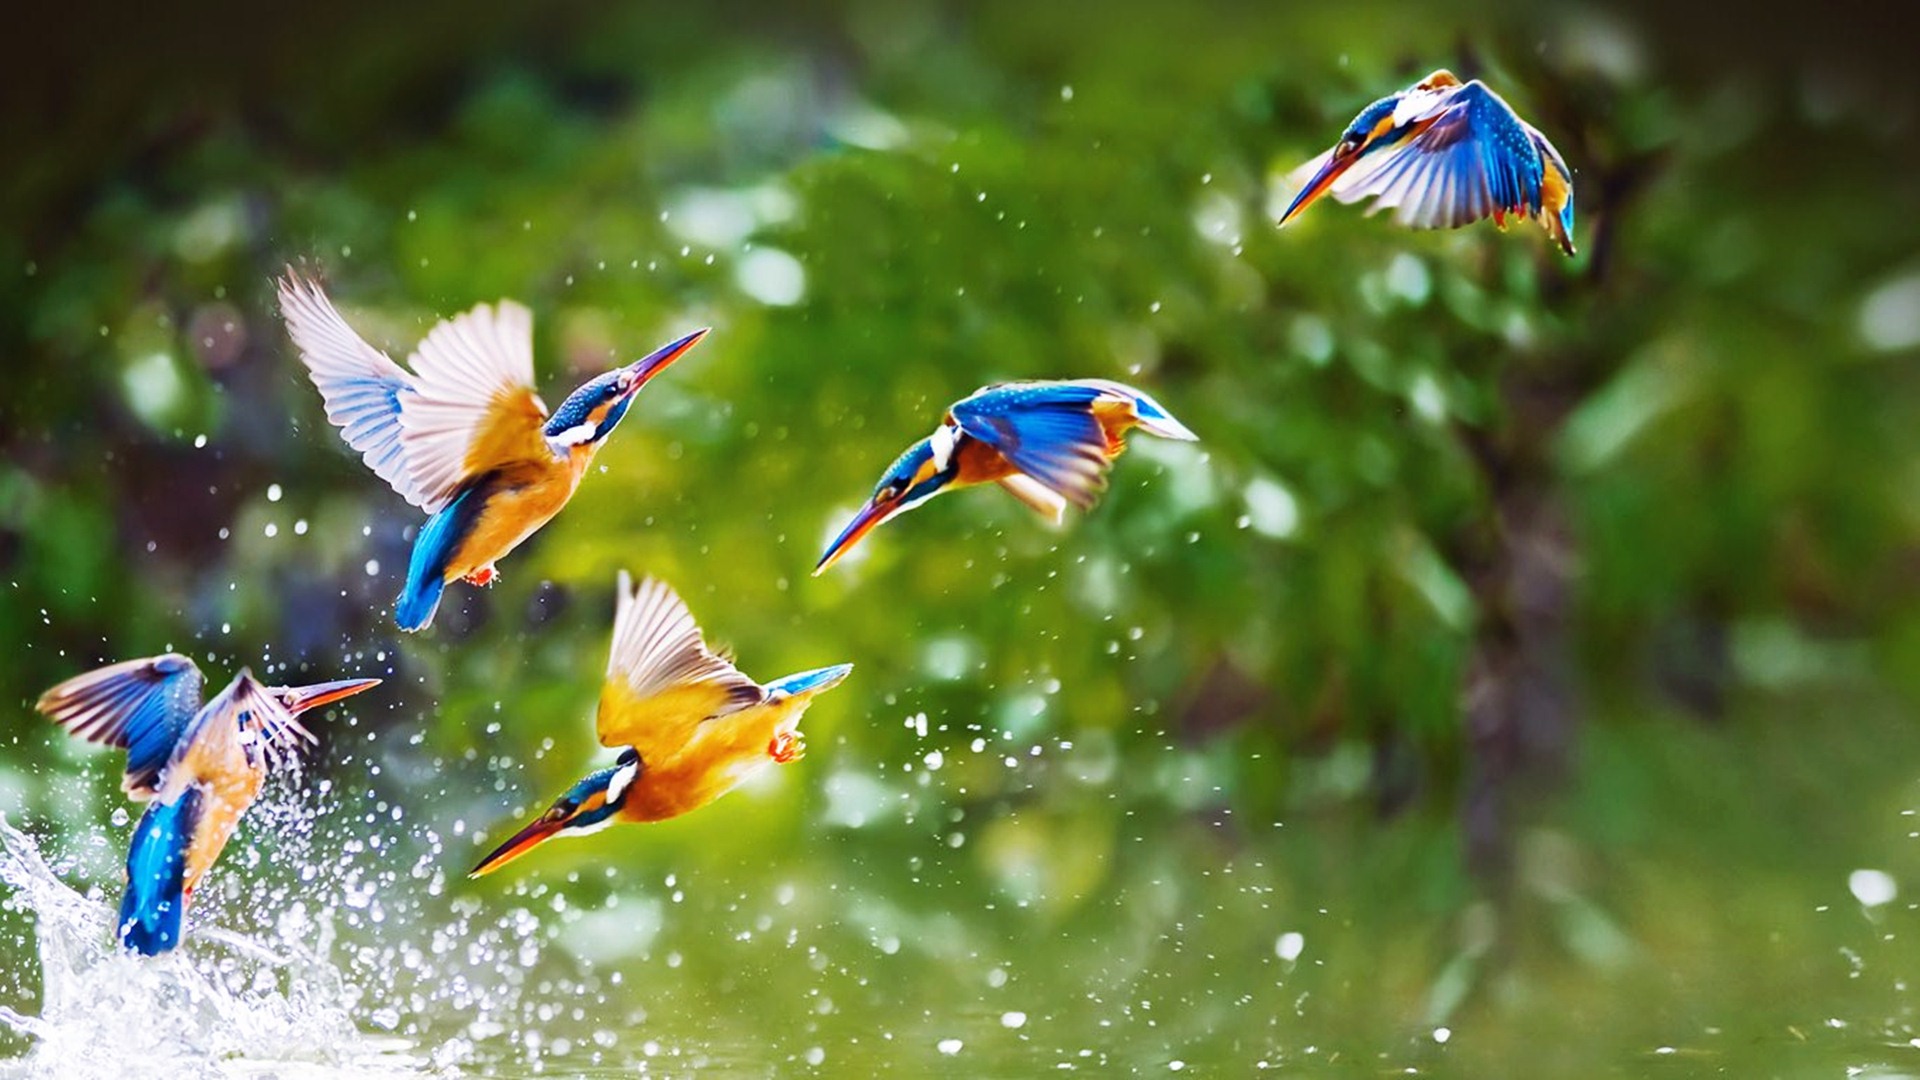 Birds Wallpapers HD Pictures Live HD Wallpaper HQ Pictures Images